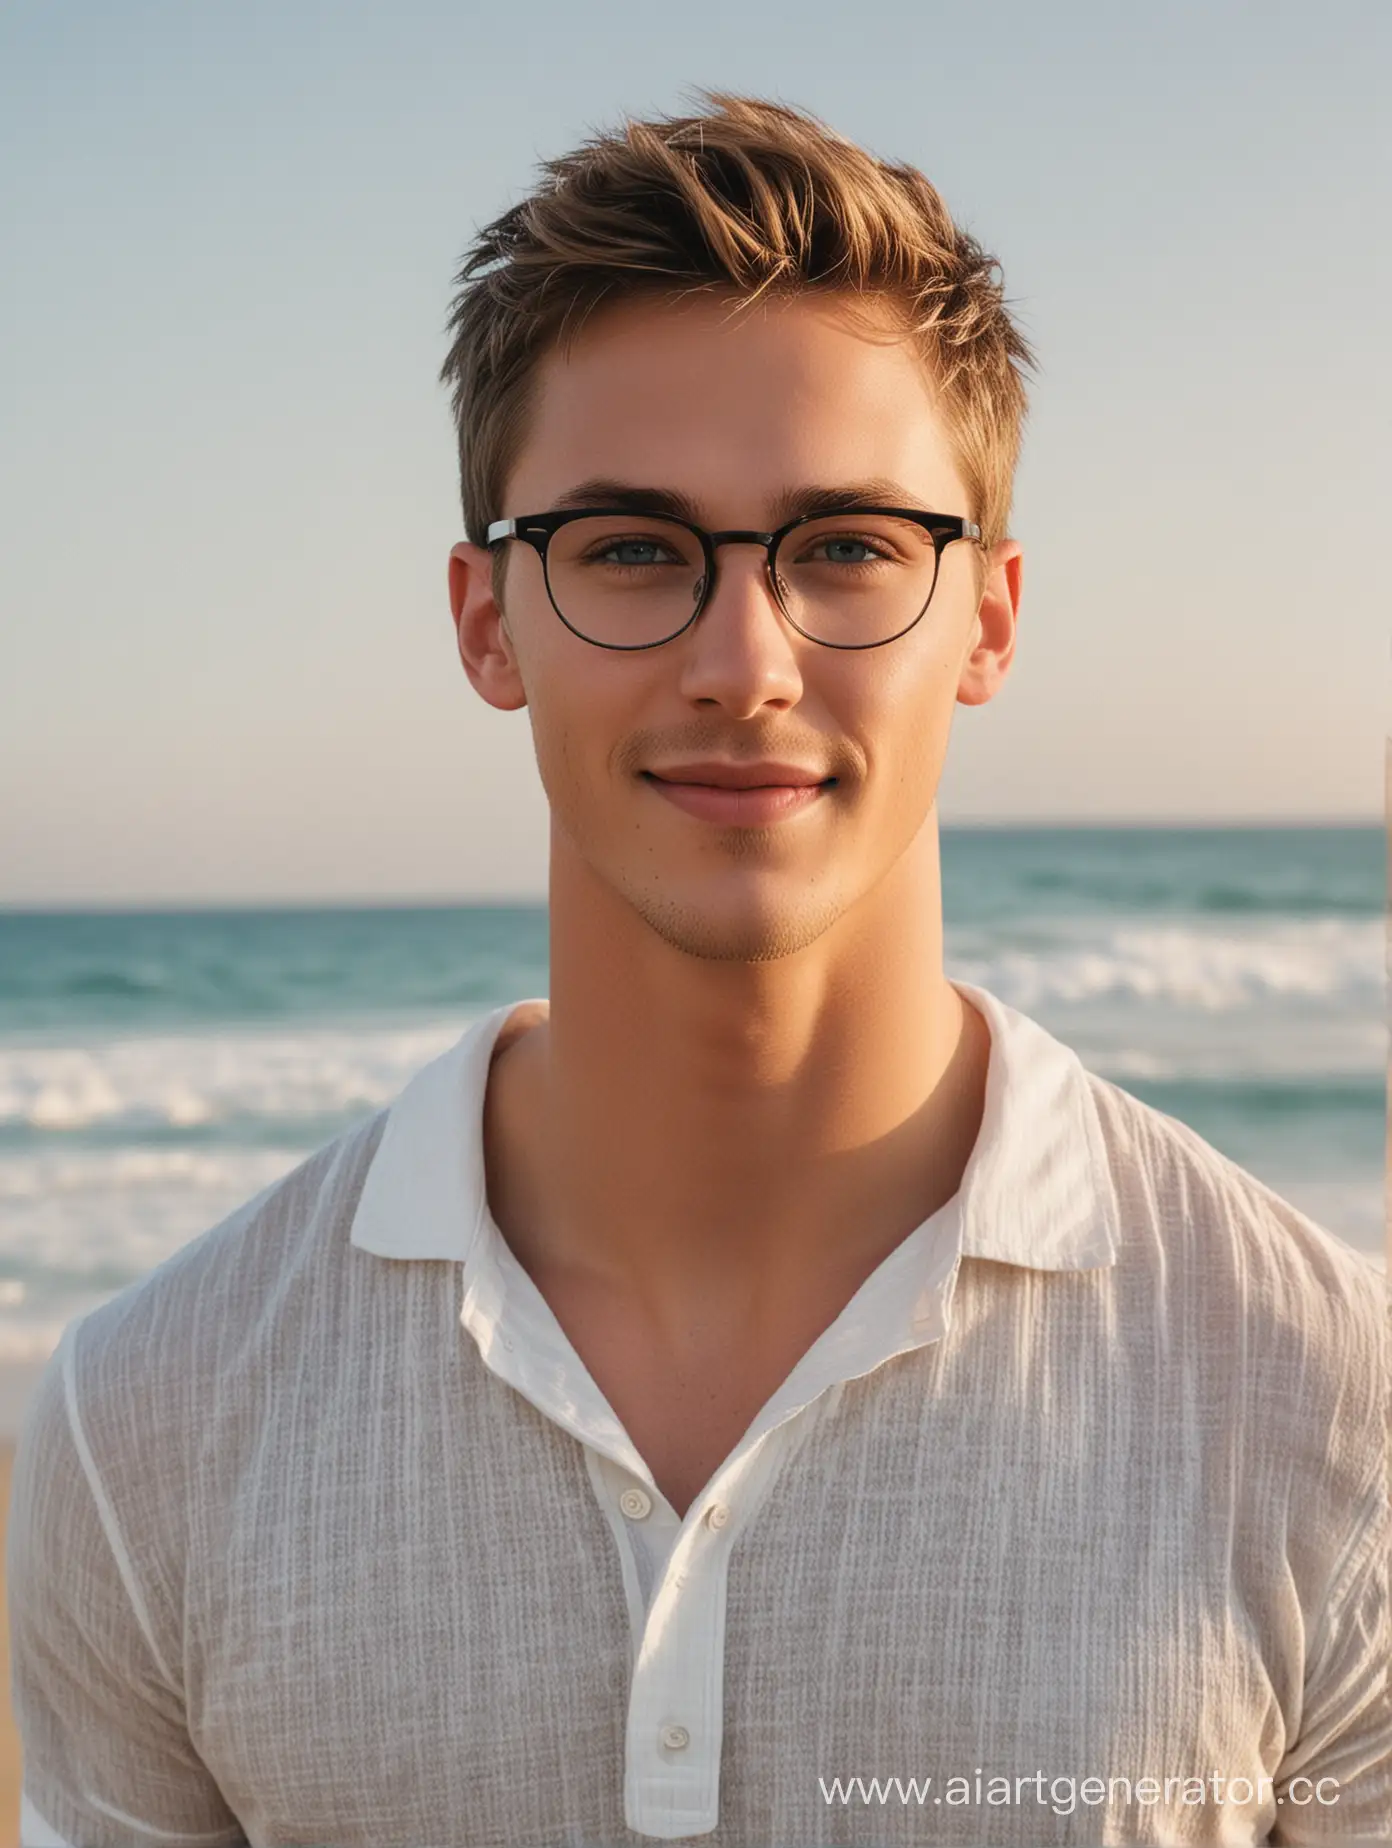 image of a man blond, blond hair, thin face, athletic, slightly disheveled hairstyle, styling, glasses on eyes, with black frames, smiling, handsome, eighteen years old, student, looks like actor Chris Wood, blue eyes, clear lips, in real life style, light body and sea and beach, in the background, full-length, shirt with collar, kind look, realistic pictures, animated gifs -ar 71:128 -Stylize 750 -v 6